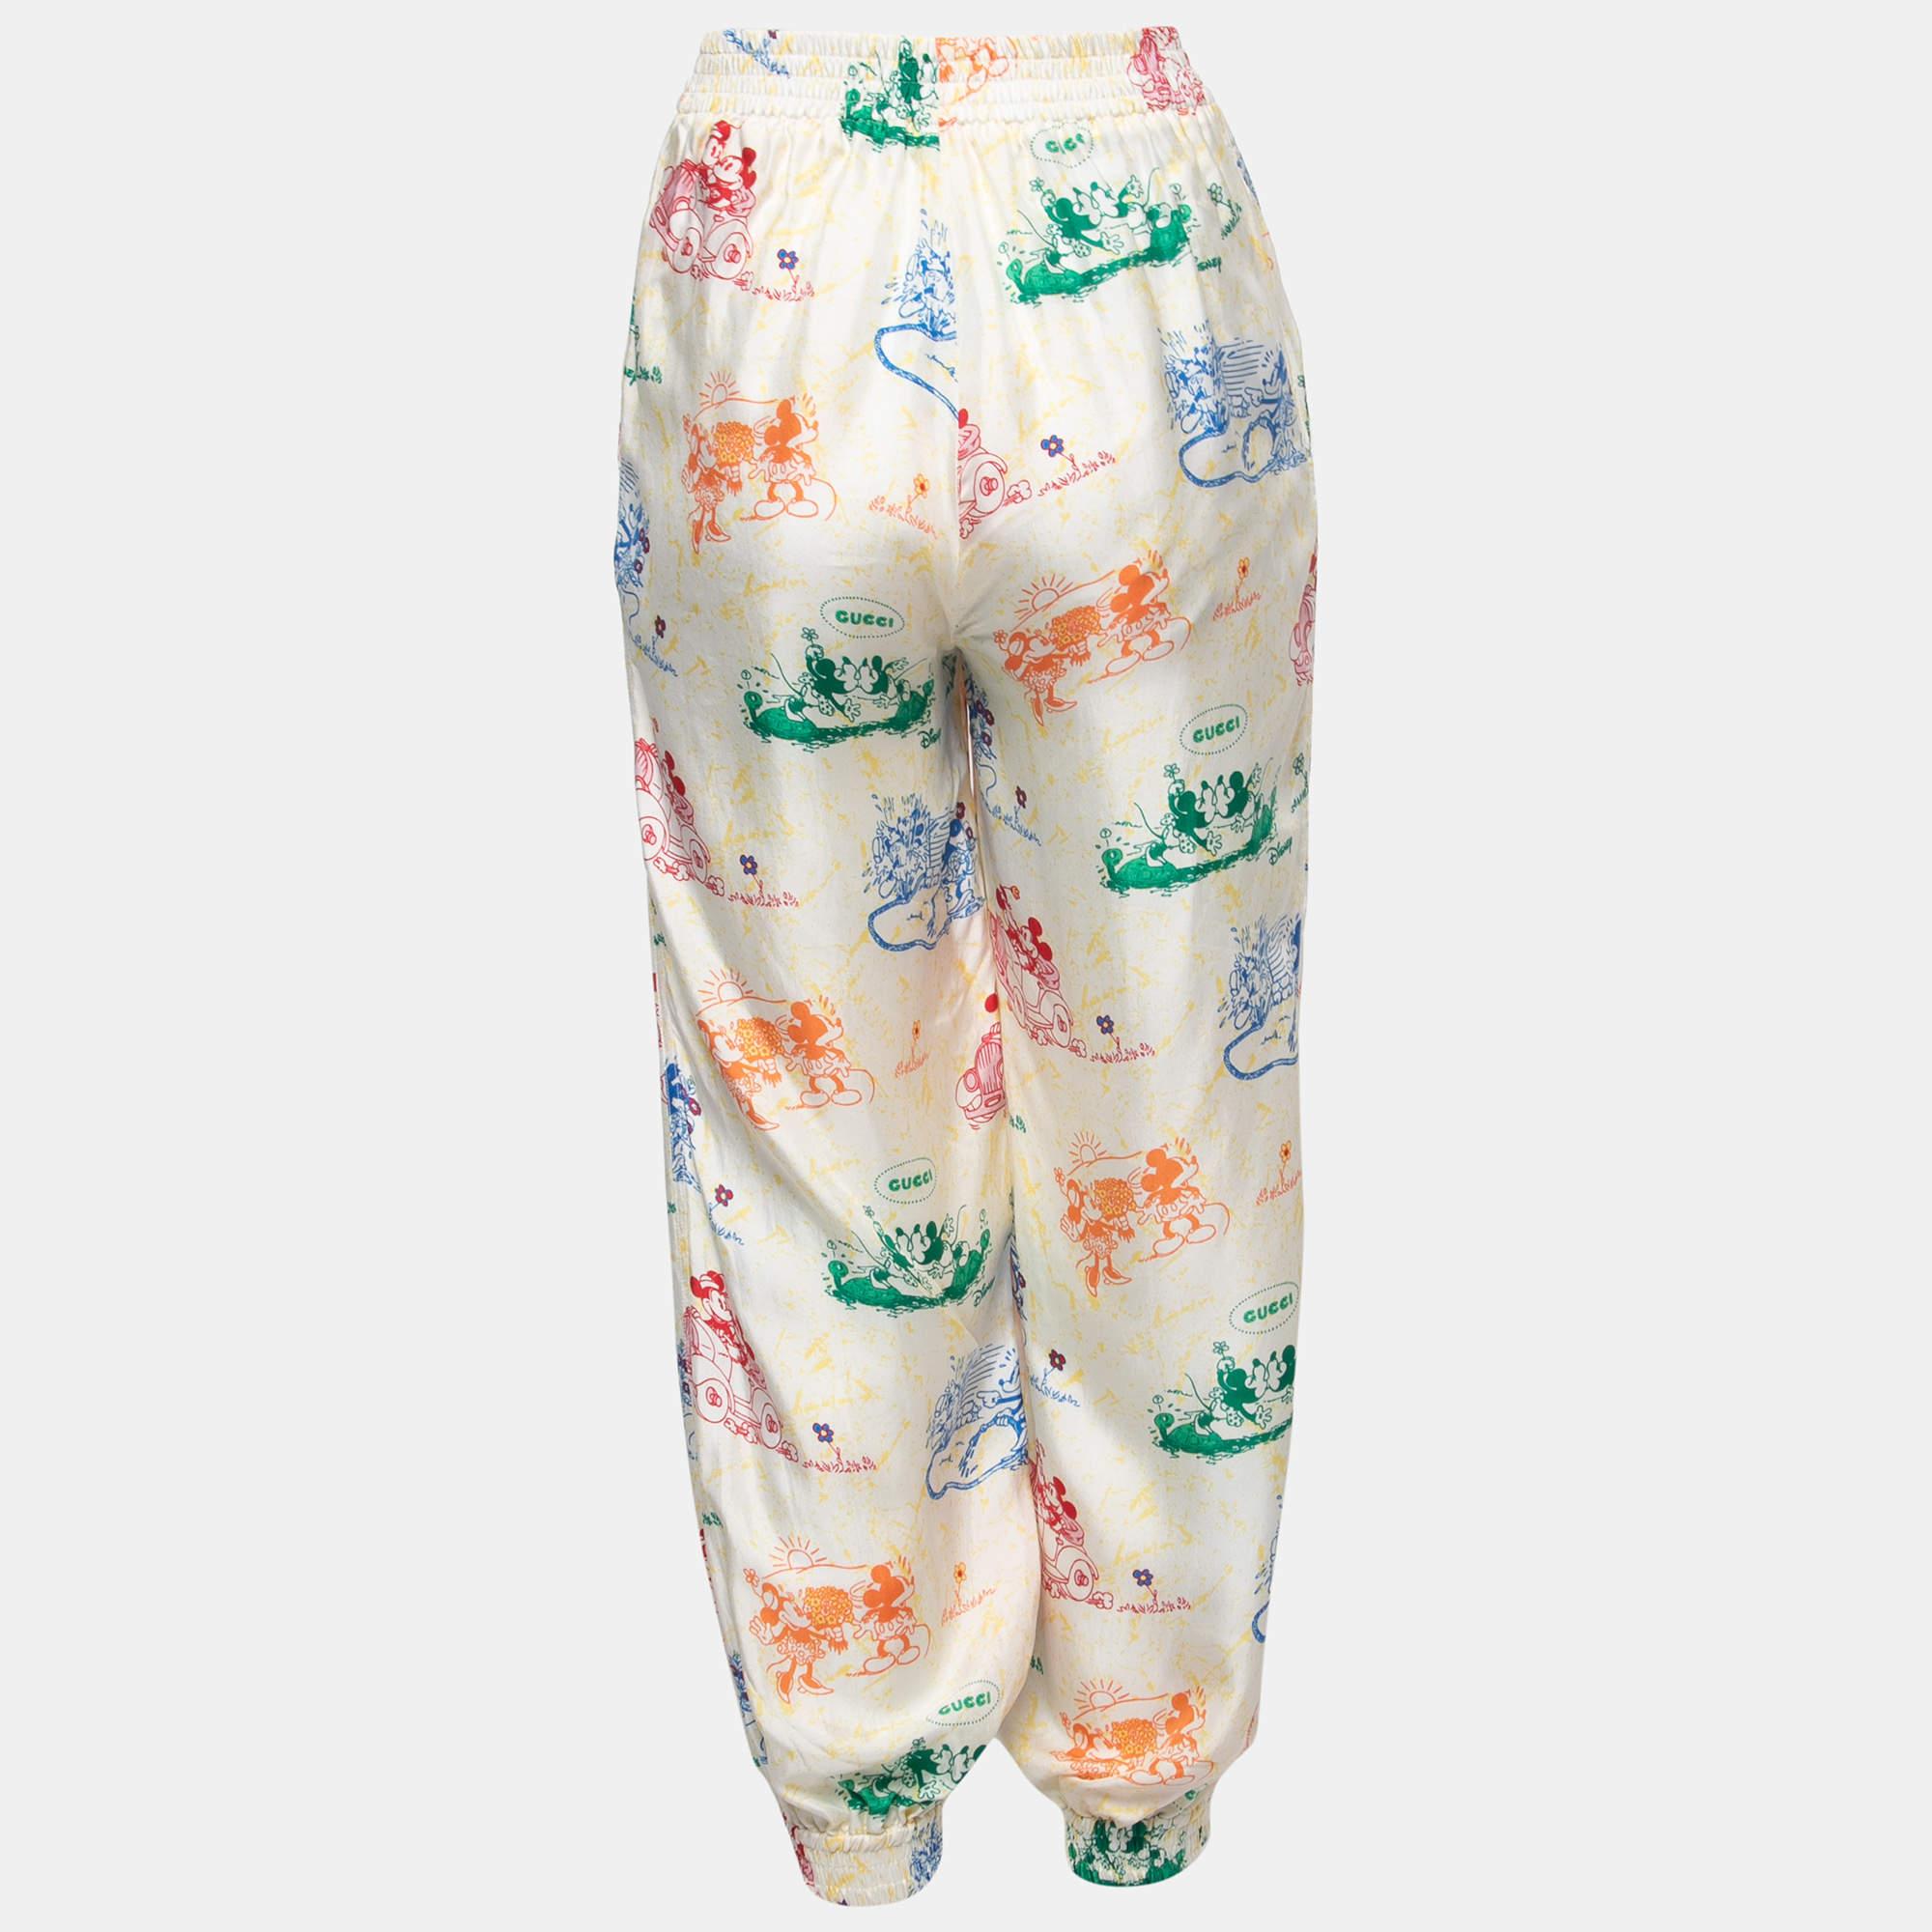 Enhance your casual attire with this pair of Gucci X Disney trousers. Designed into a superb silhouette and fit, this pair of trousers will definitely make you look elegant.

